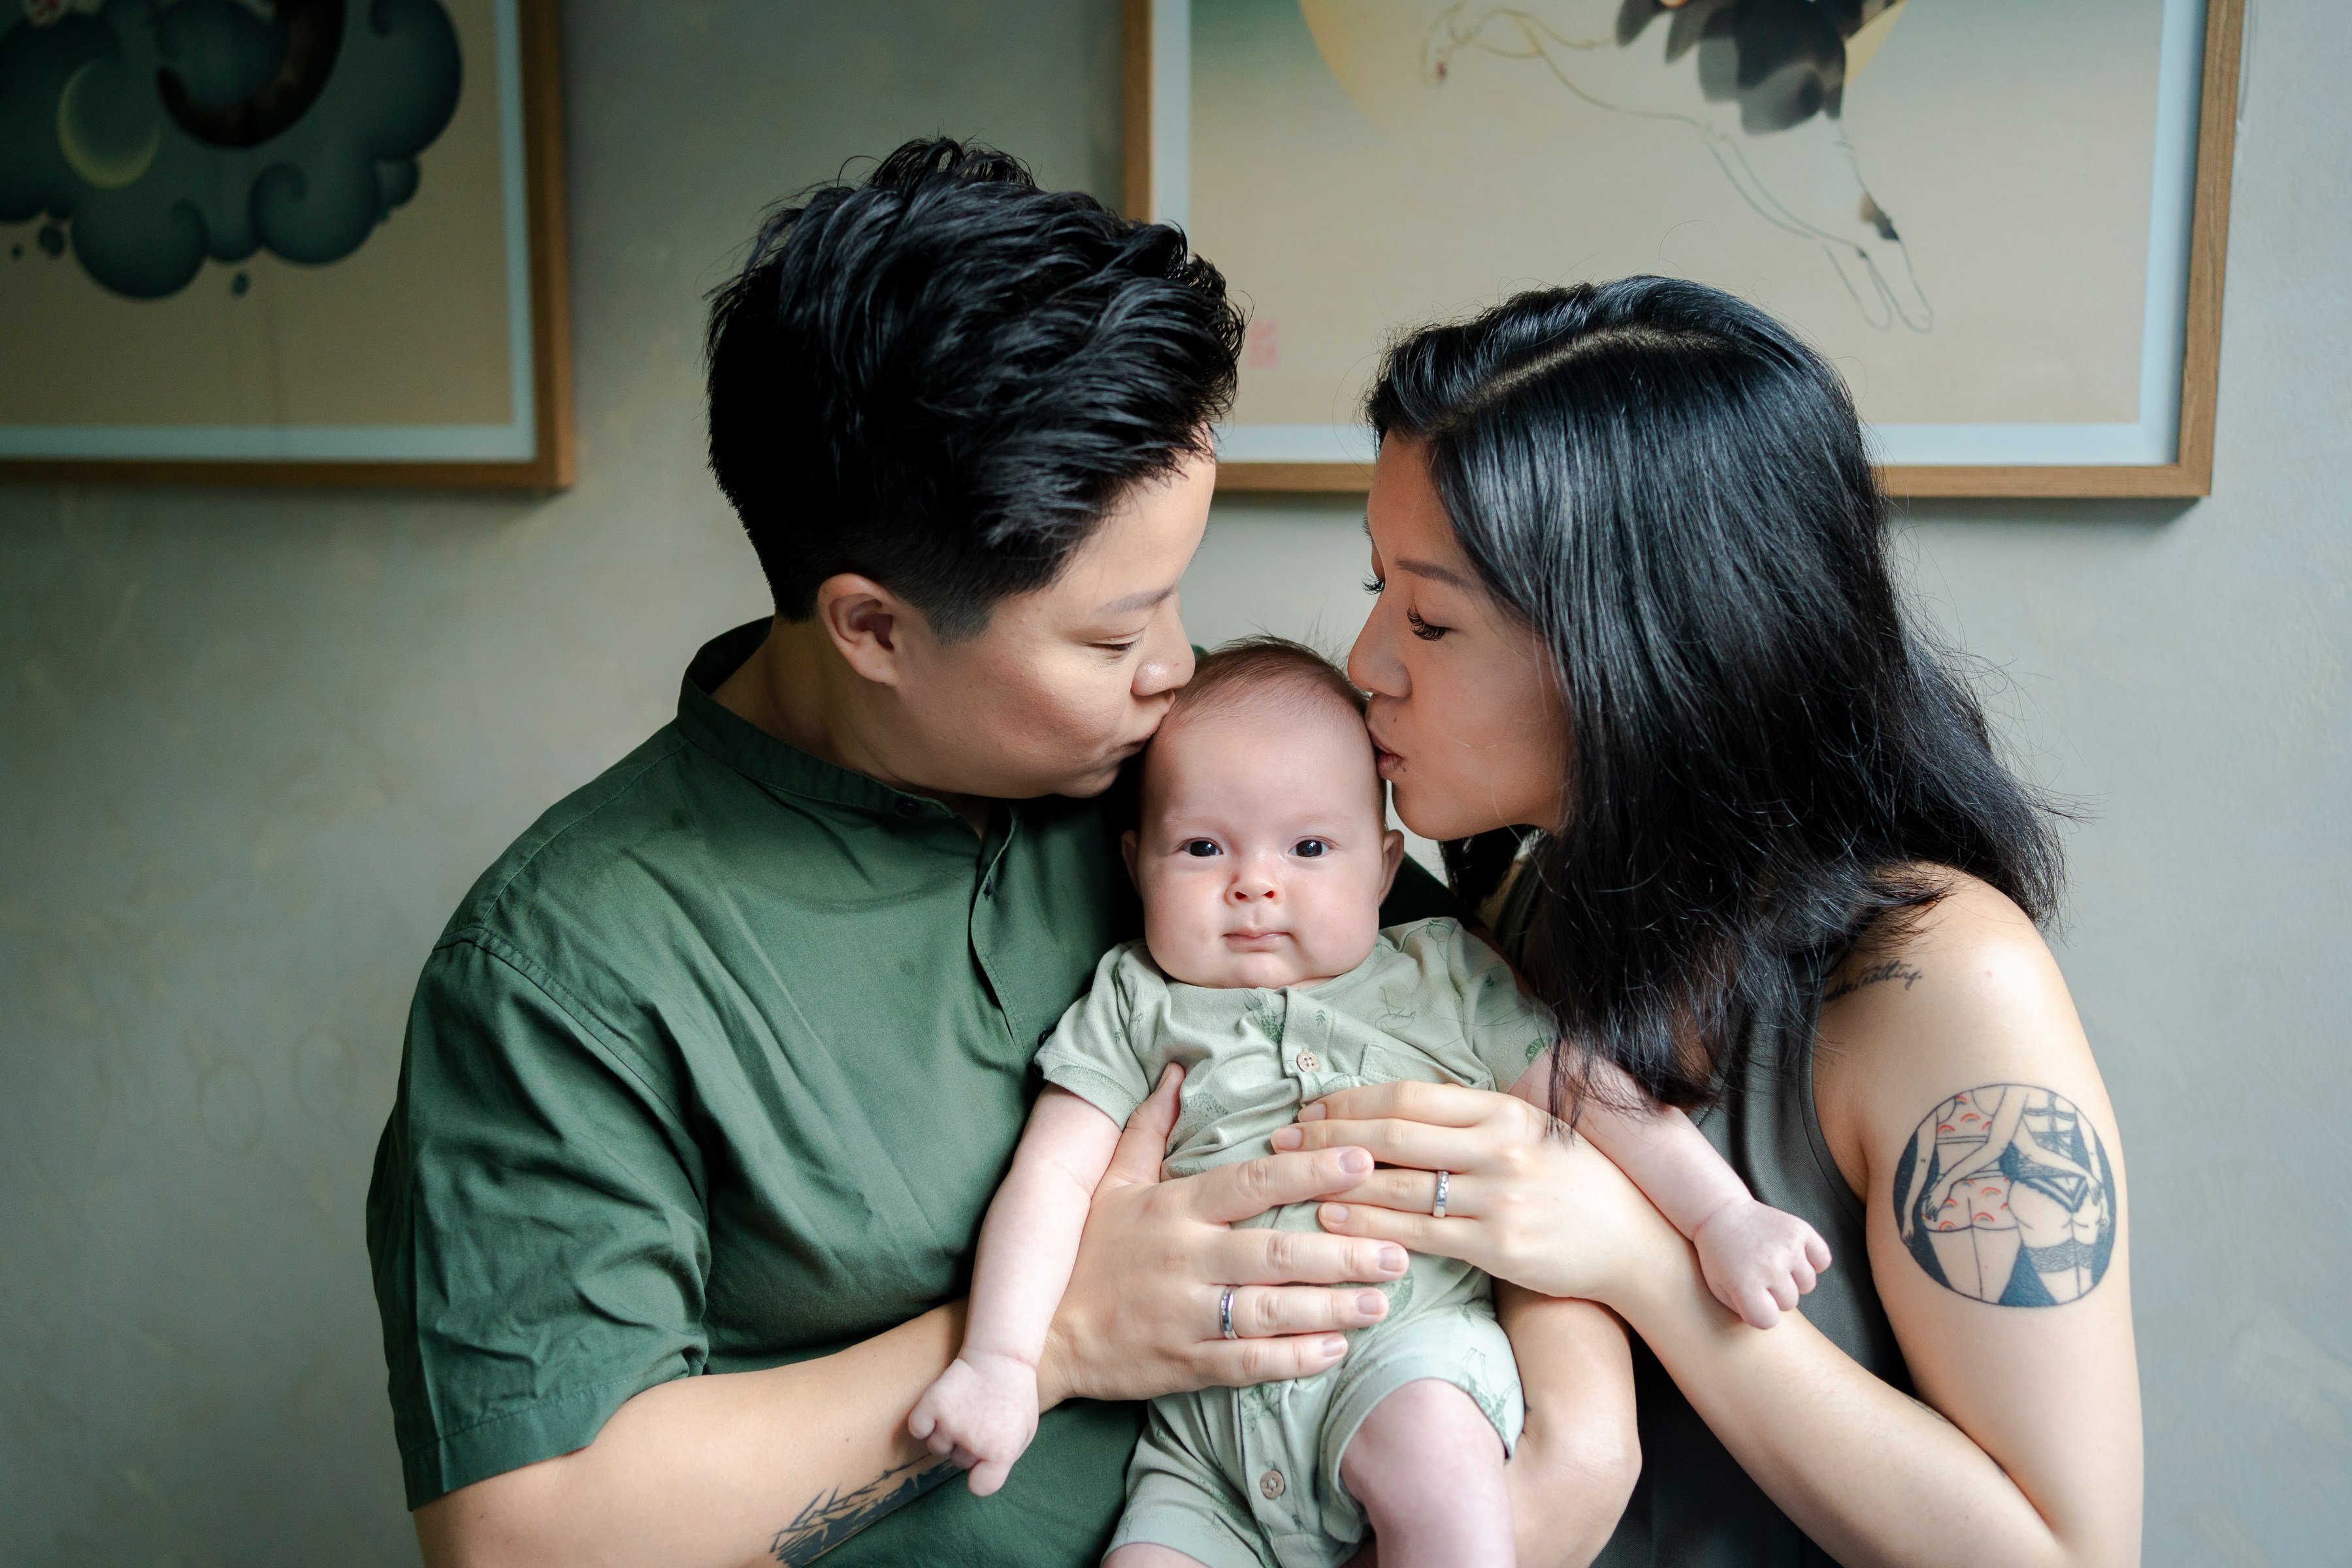 Singaporean LGBTQ couple Ching Sia (left) and Cally Cheung with their baby daughter. Under Singapore’s laws, they are classified as single unmarried women, despite getting married in Australia two years ago. Photo: Handout